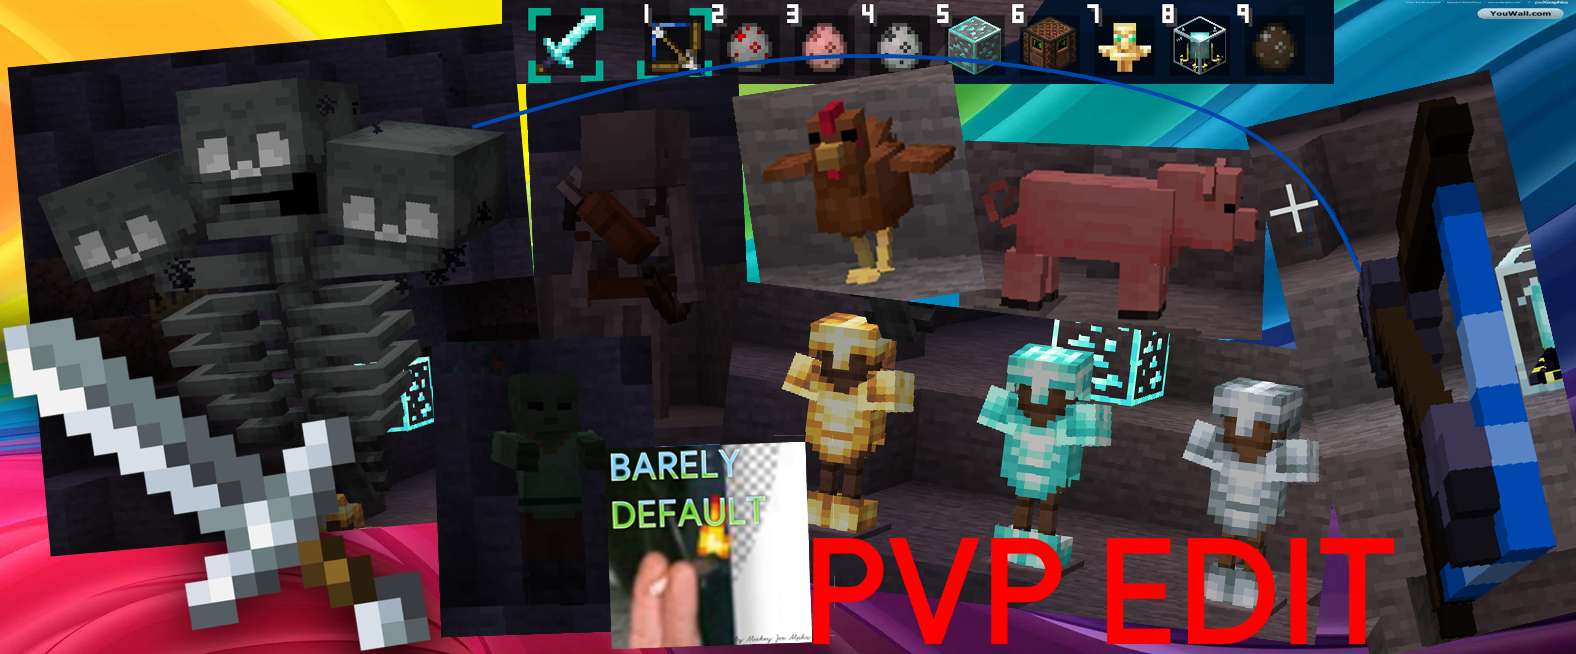 Barely Default - Official PVP Edit 16x by MickeyJoe on PvPRP